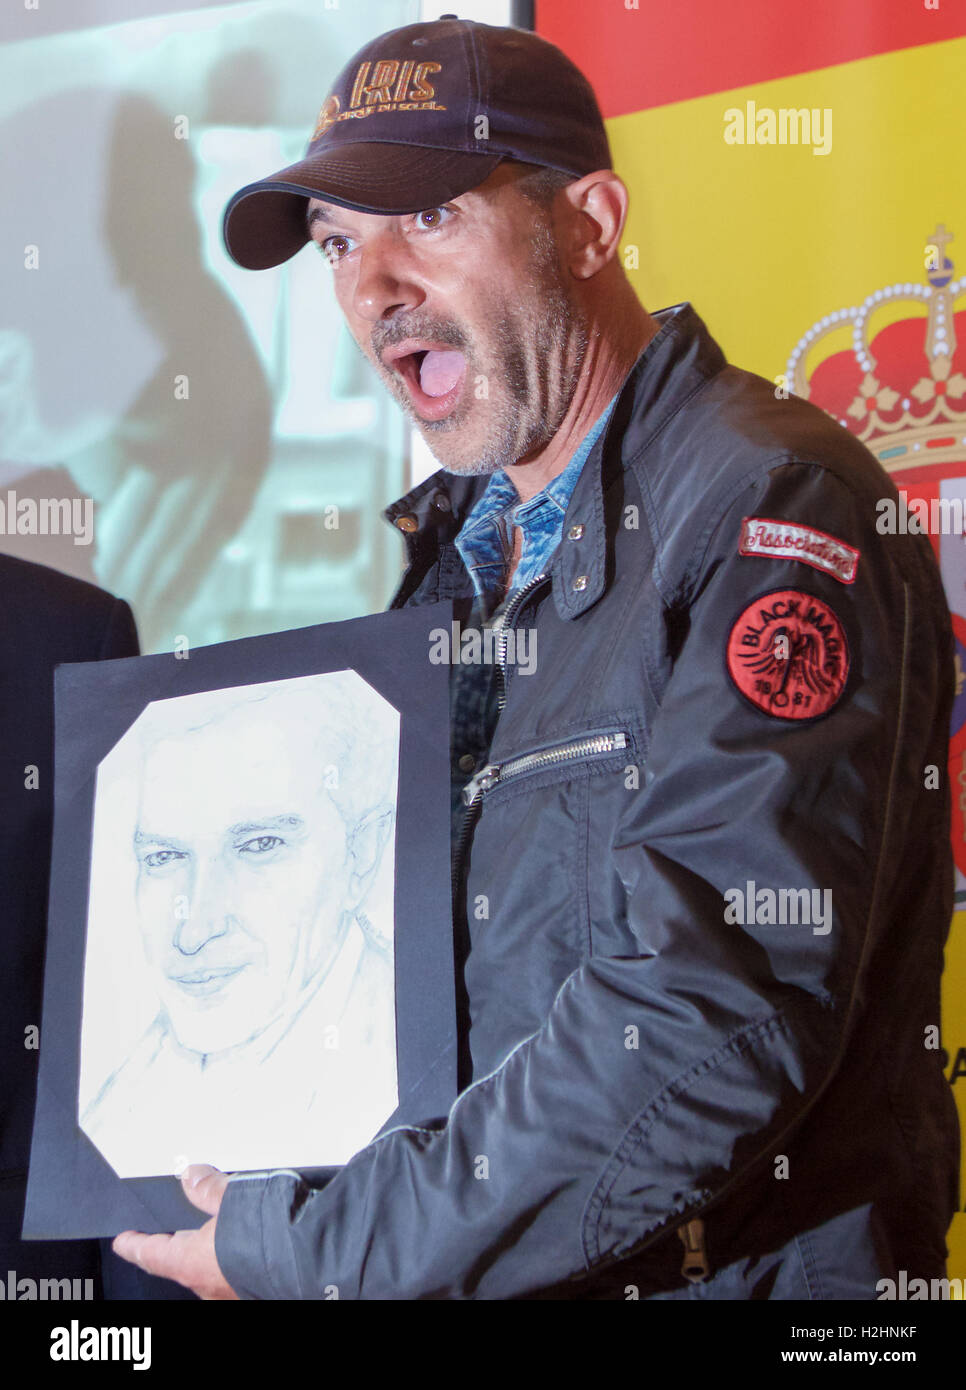 Sofia, Bulgaria - June 11, 2013: Antonio Banderas is reacting when given a drawing from a fan at Mati hall press conference duri Stock Photo